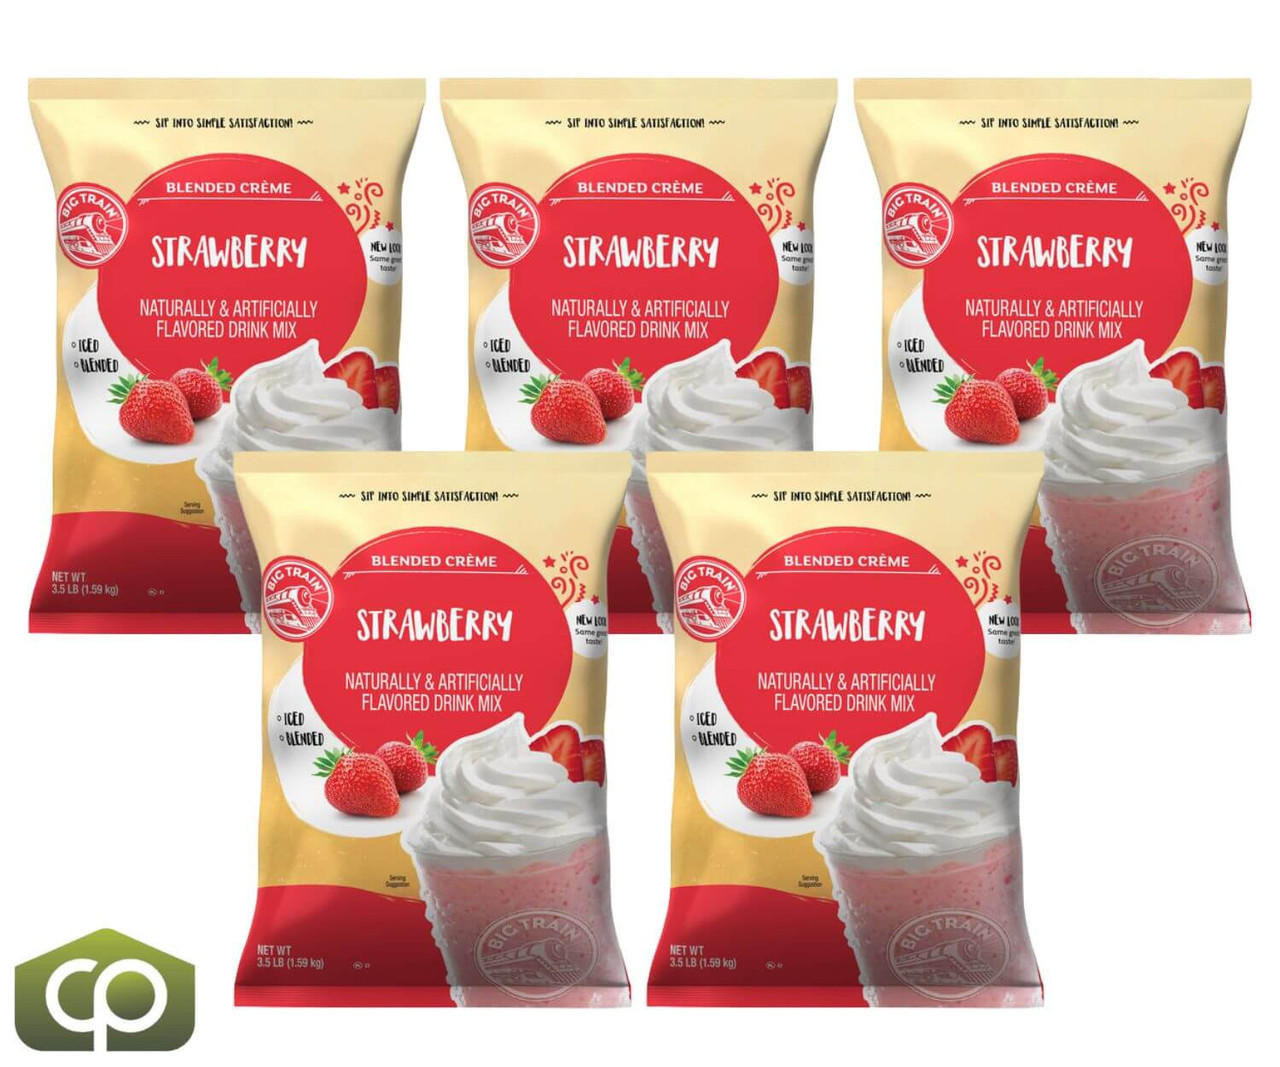  Big Train 3.5 lb. Perfect Strawberry Blended Creme Frappe Mix (5/Case) 